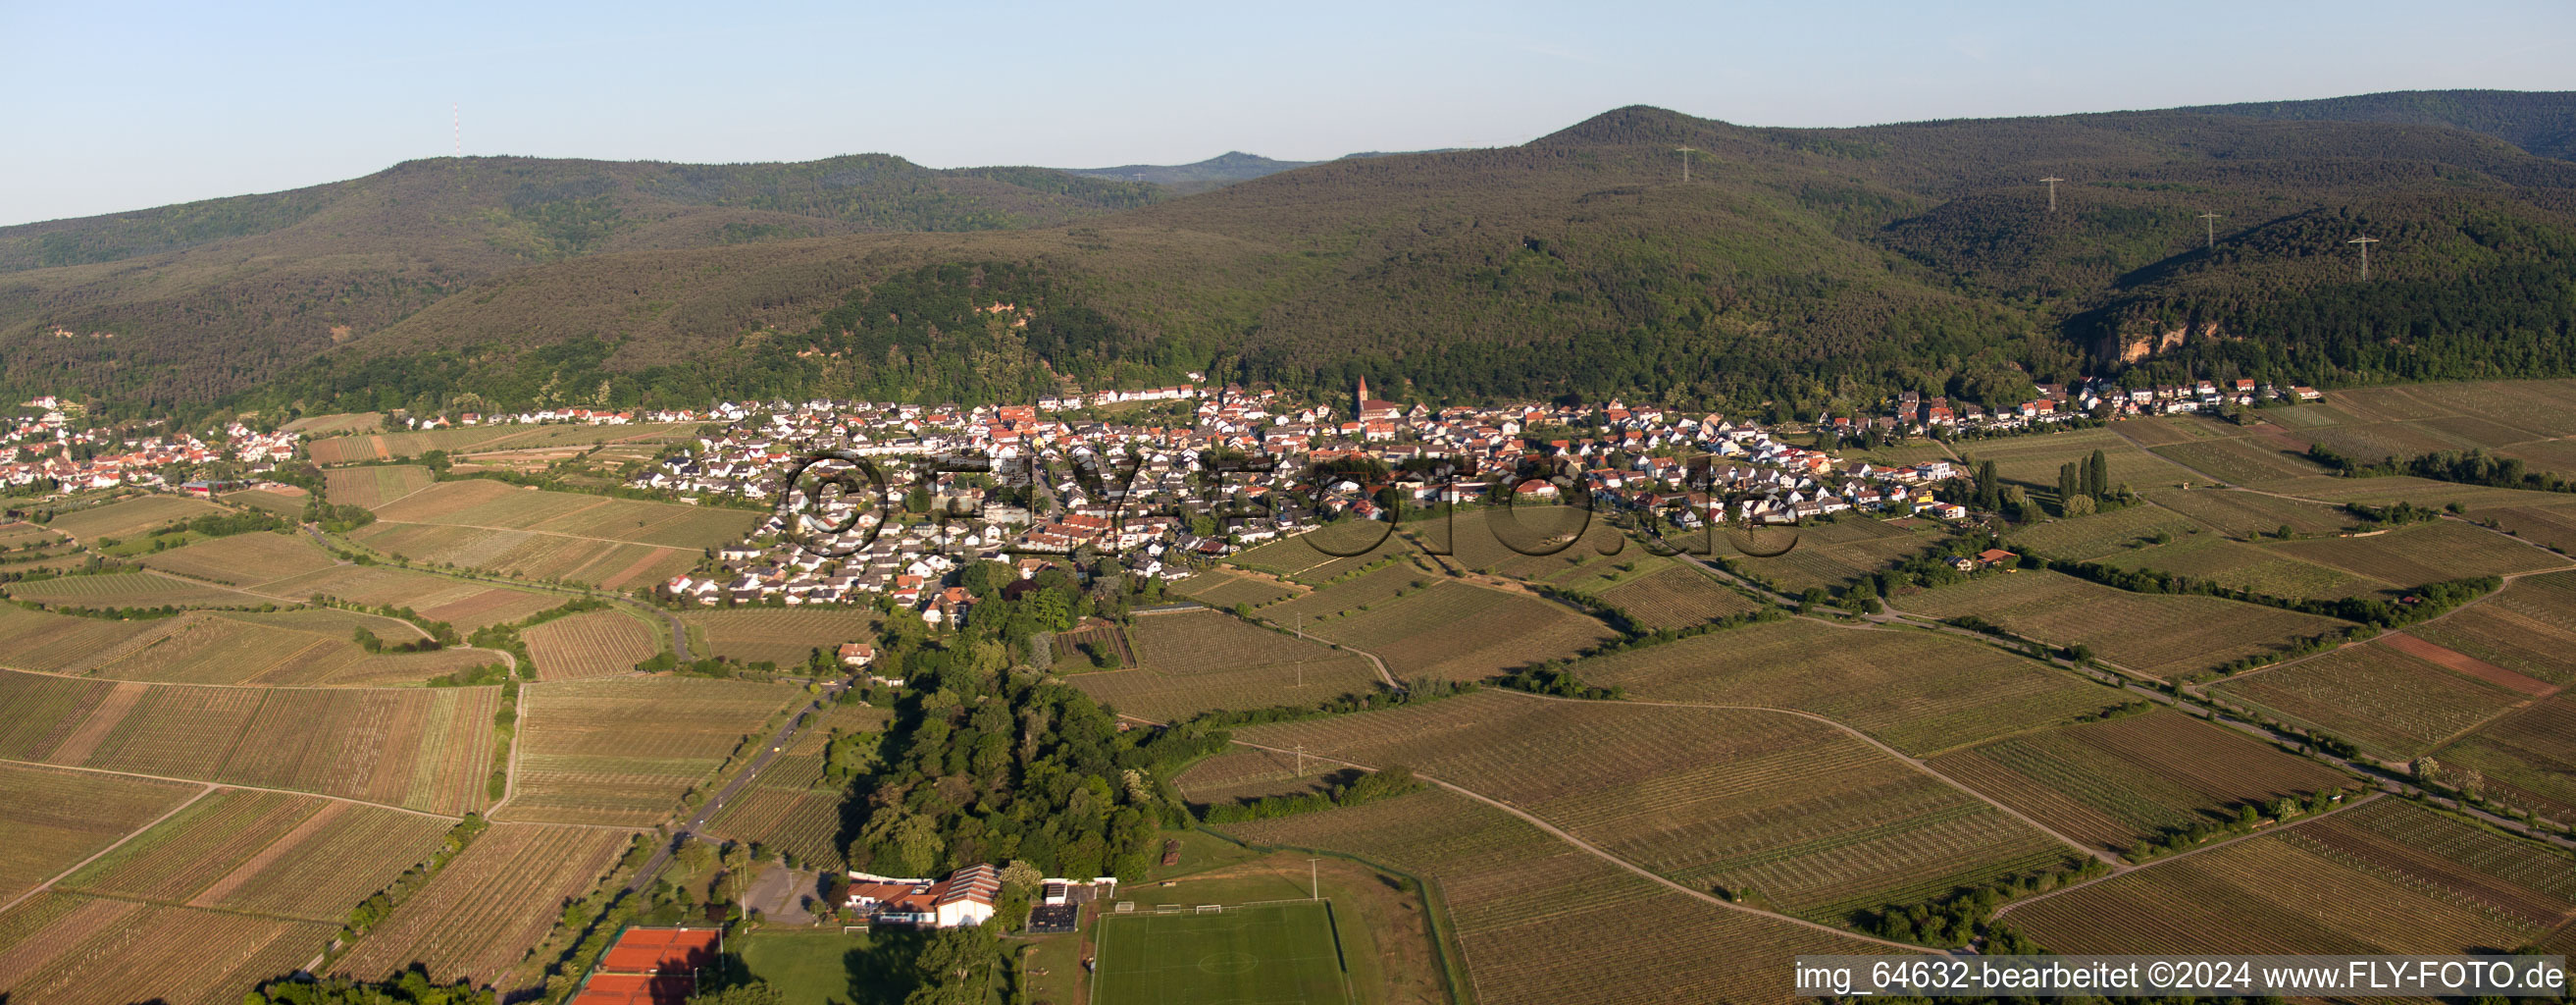 Panoramic perspective Village - view on the edge of wine yards in the district Koenigsbach in Neustadt an der Weinstrasse in the state Rhineland-Palatinate, Germany